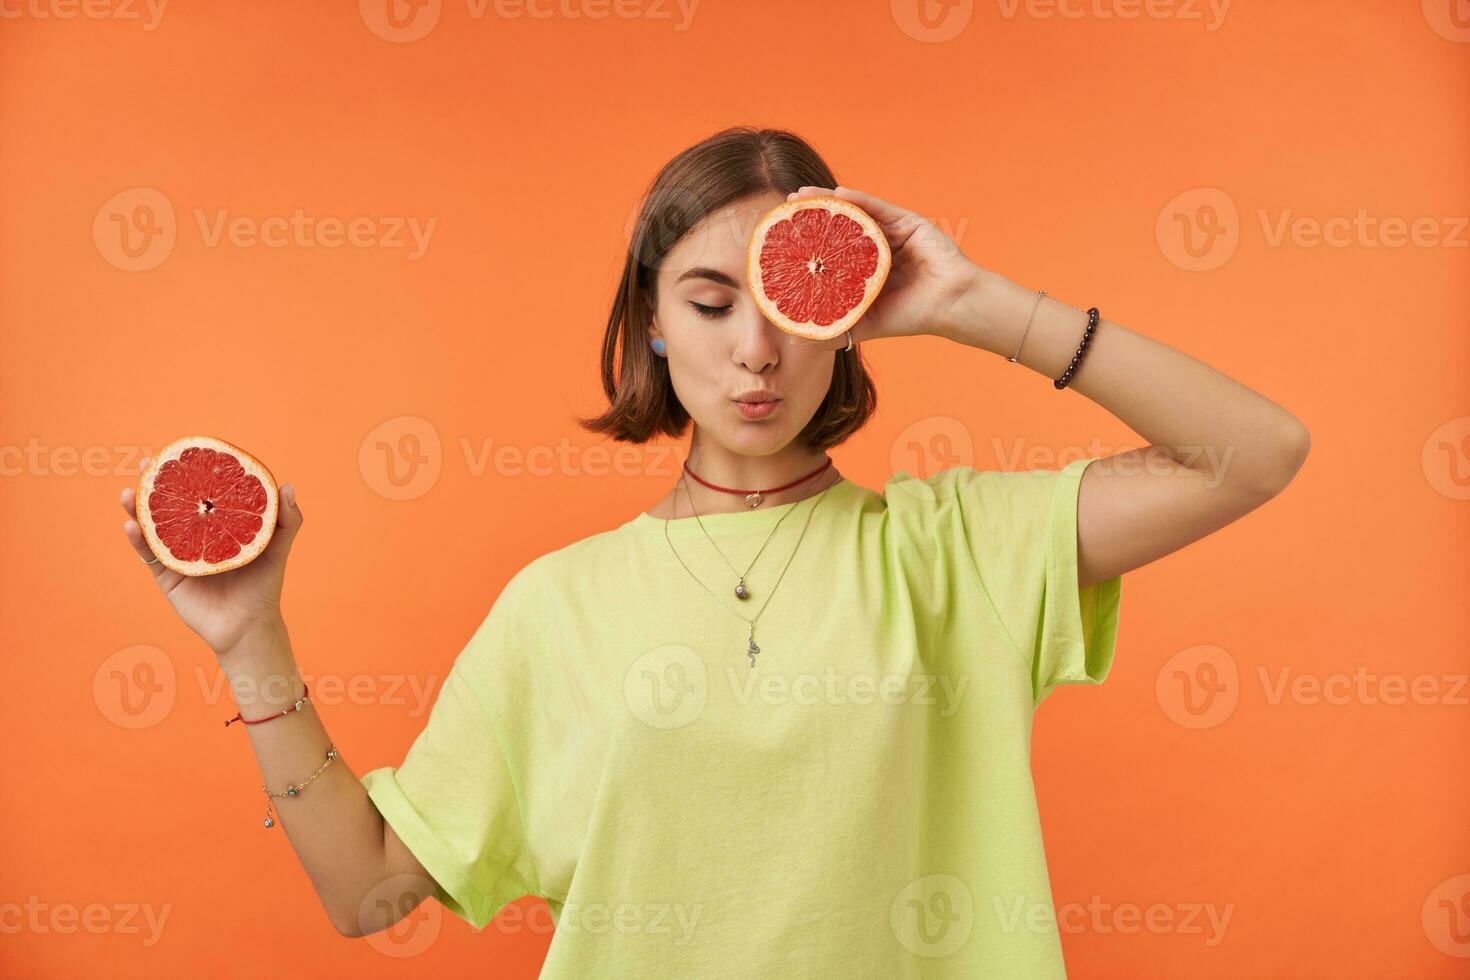 Female student, young lady with short brunette hair, dreaming with fruits. Holding grapefruit over her eye, cover one eye. Standing over orange background. Wearing green t-shirt, braces and bracelets photo